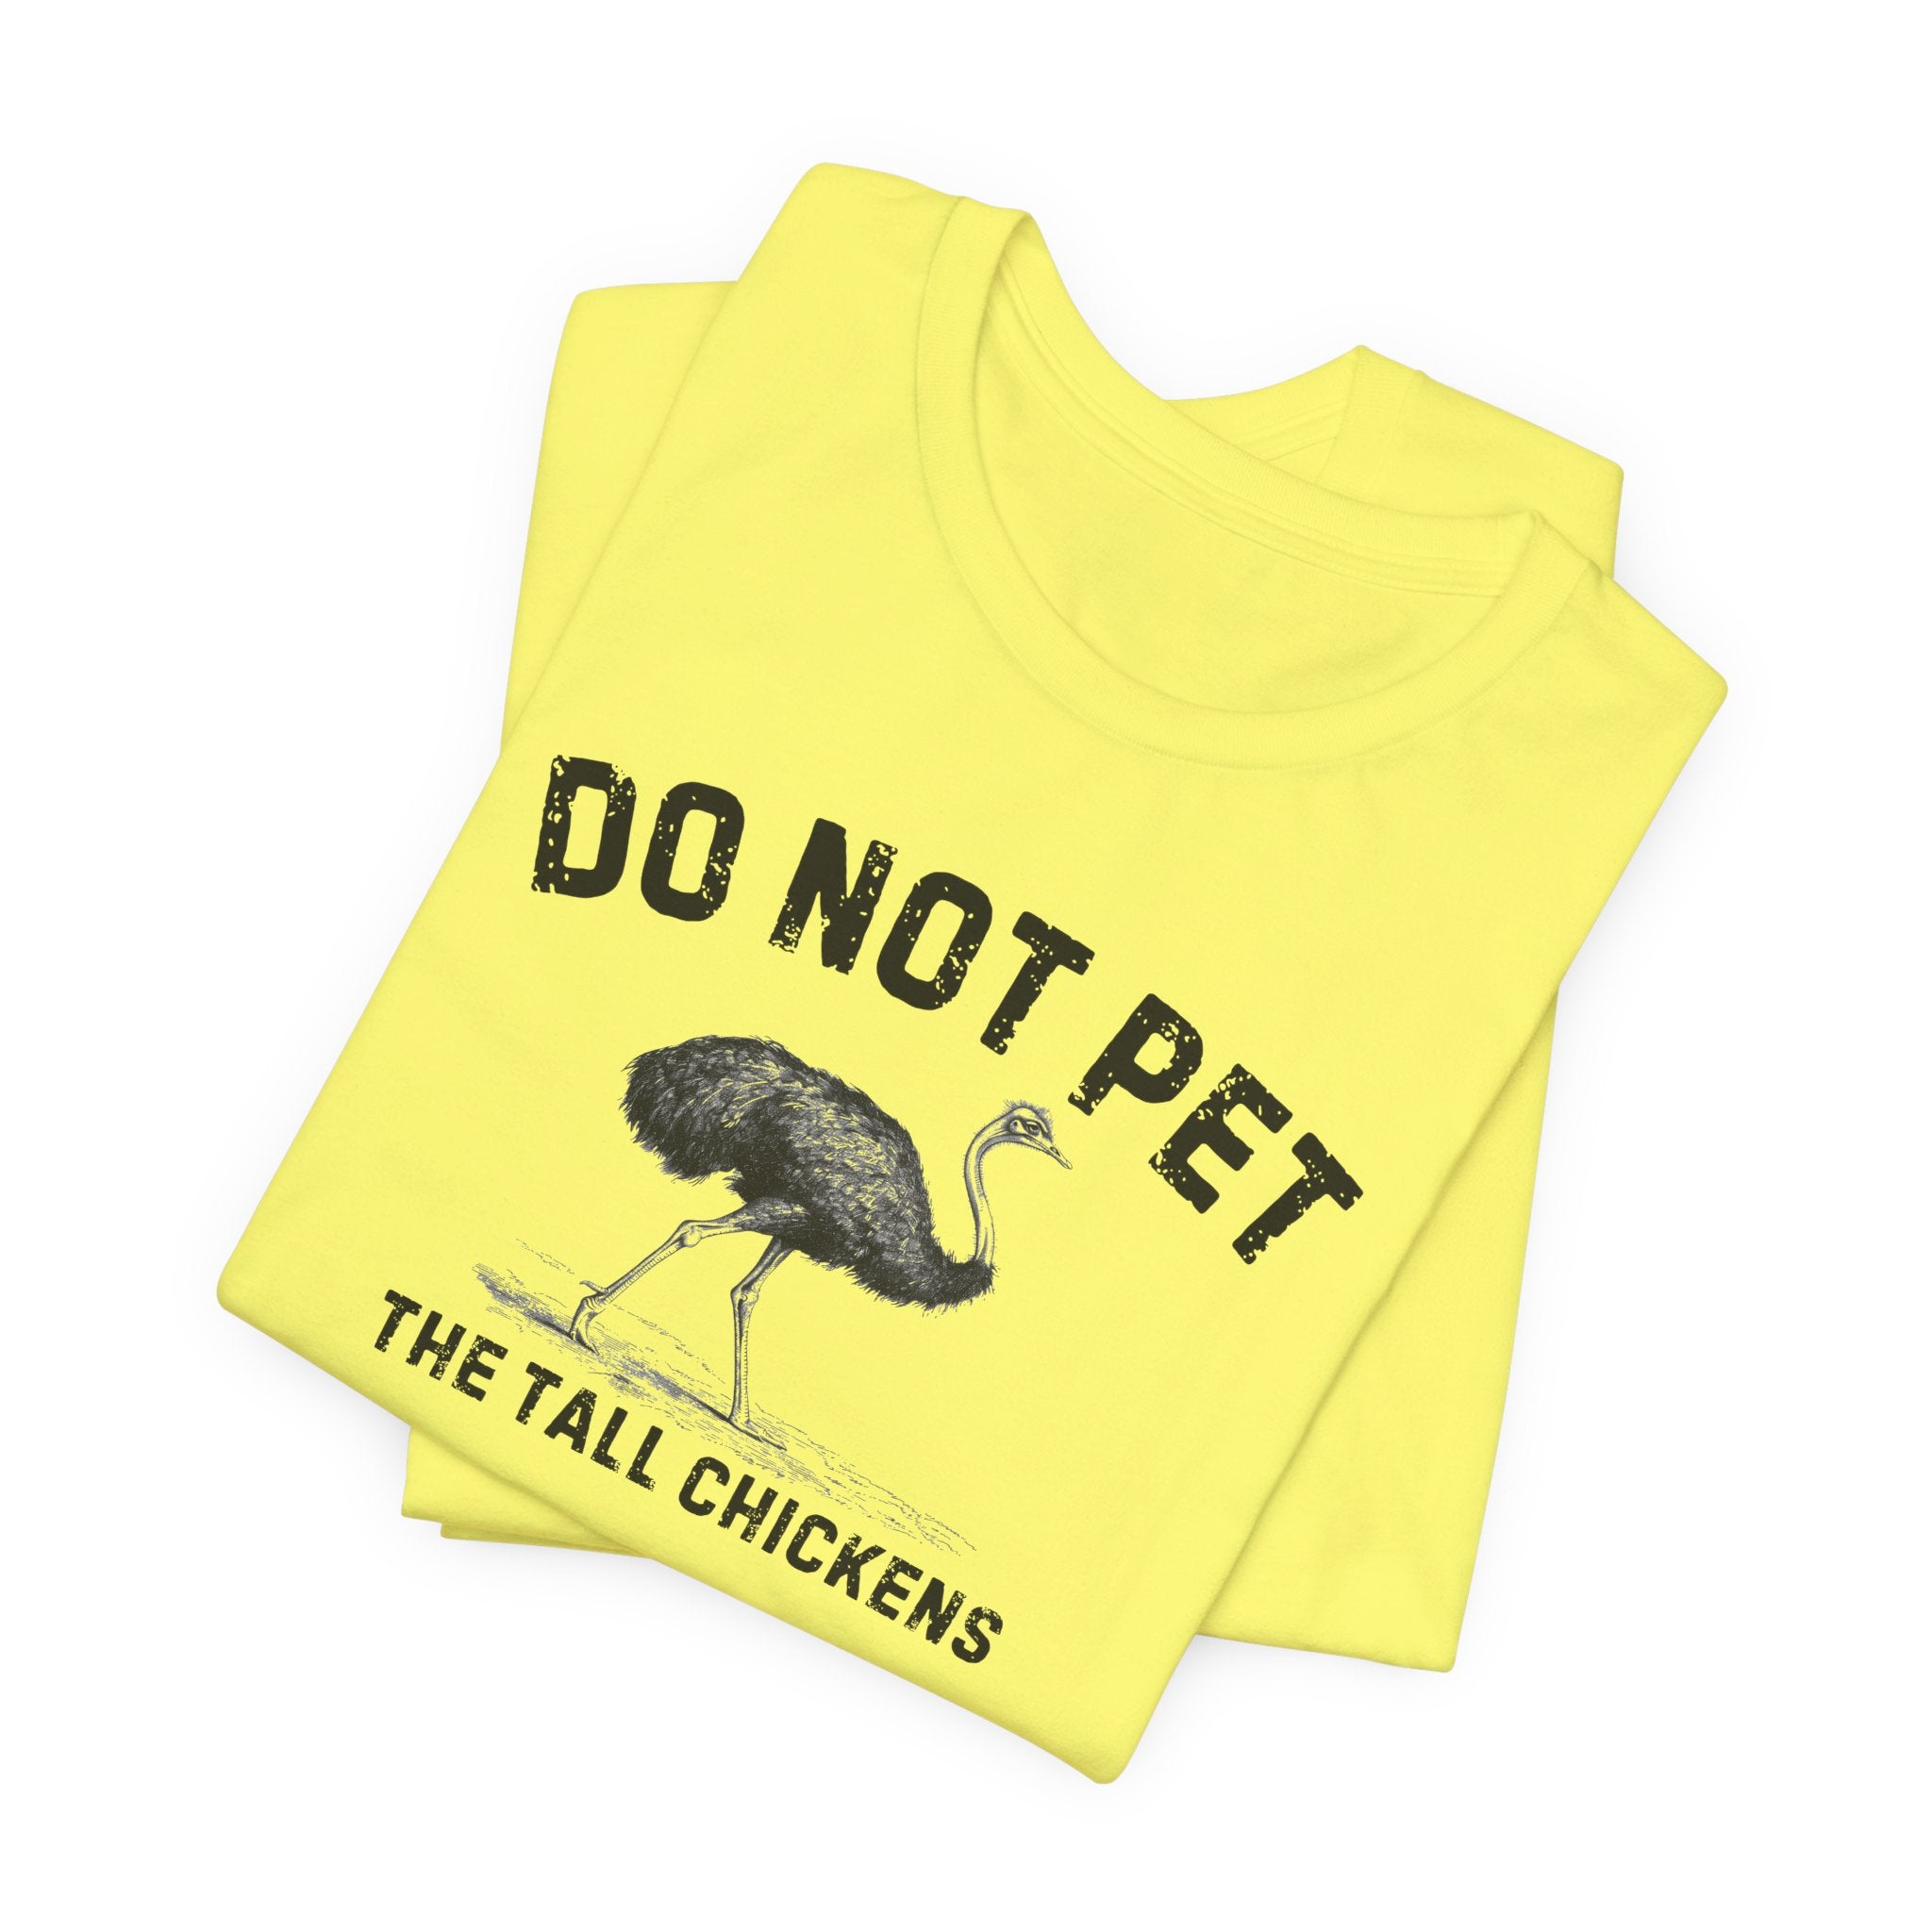 Do Not Pet The Tall Chickens Shirt Funny Ostrich Lover Tee